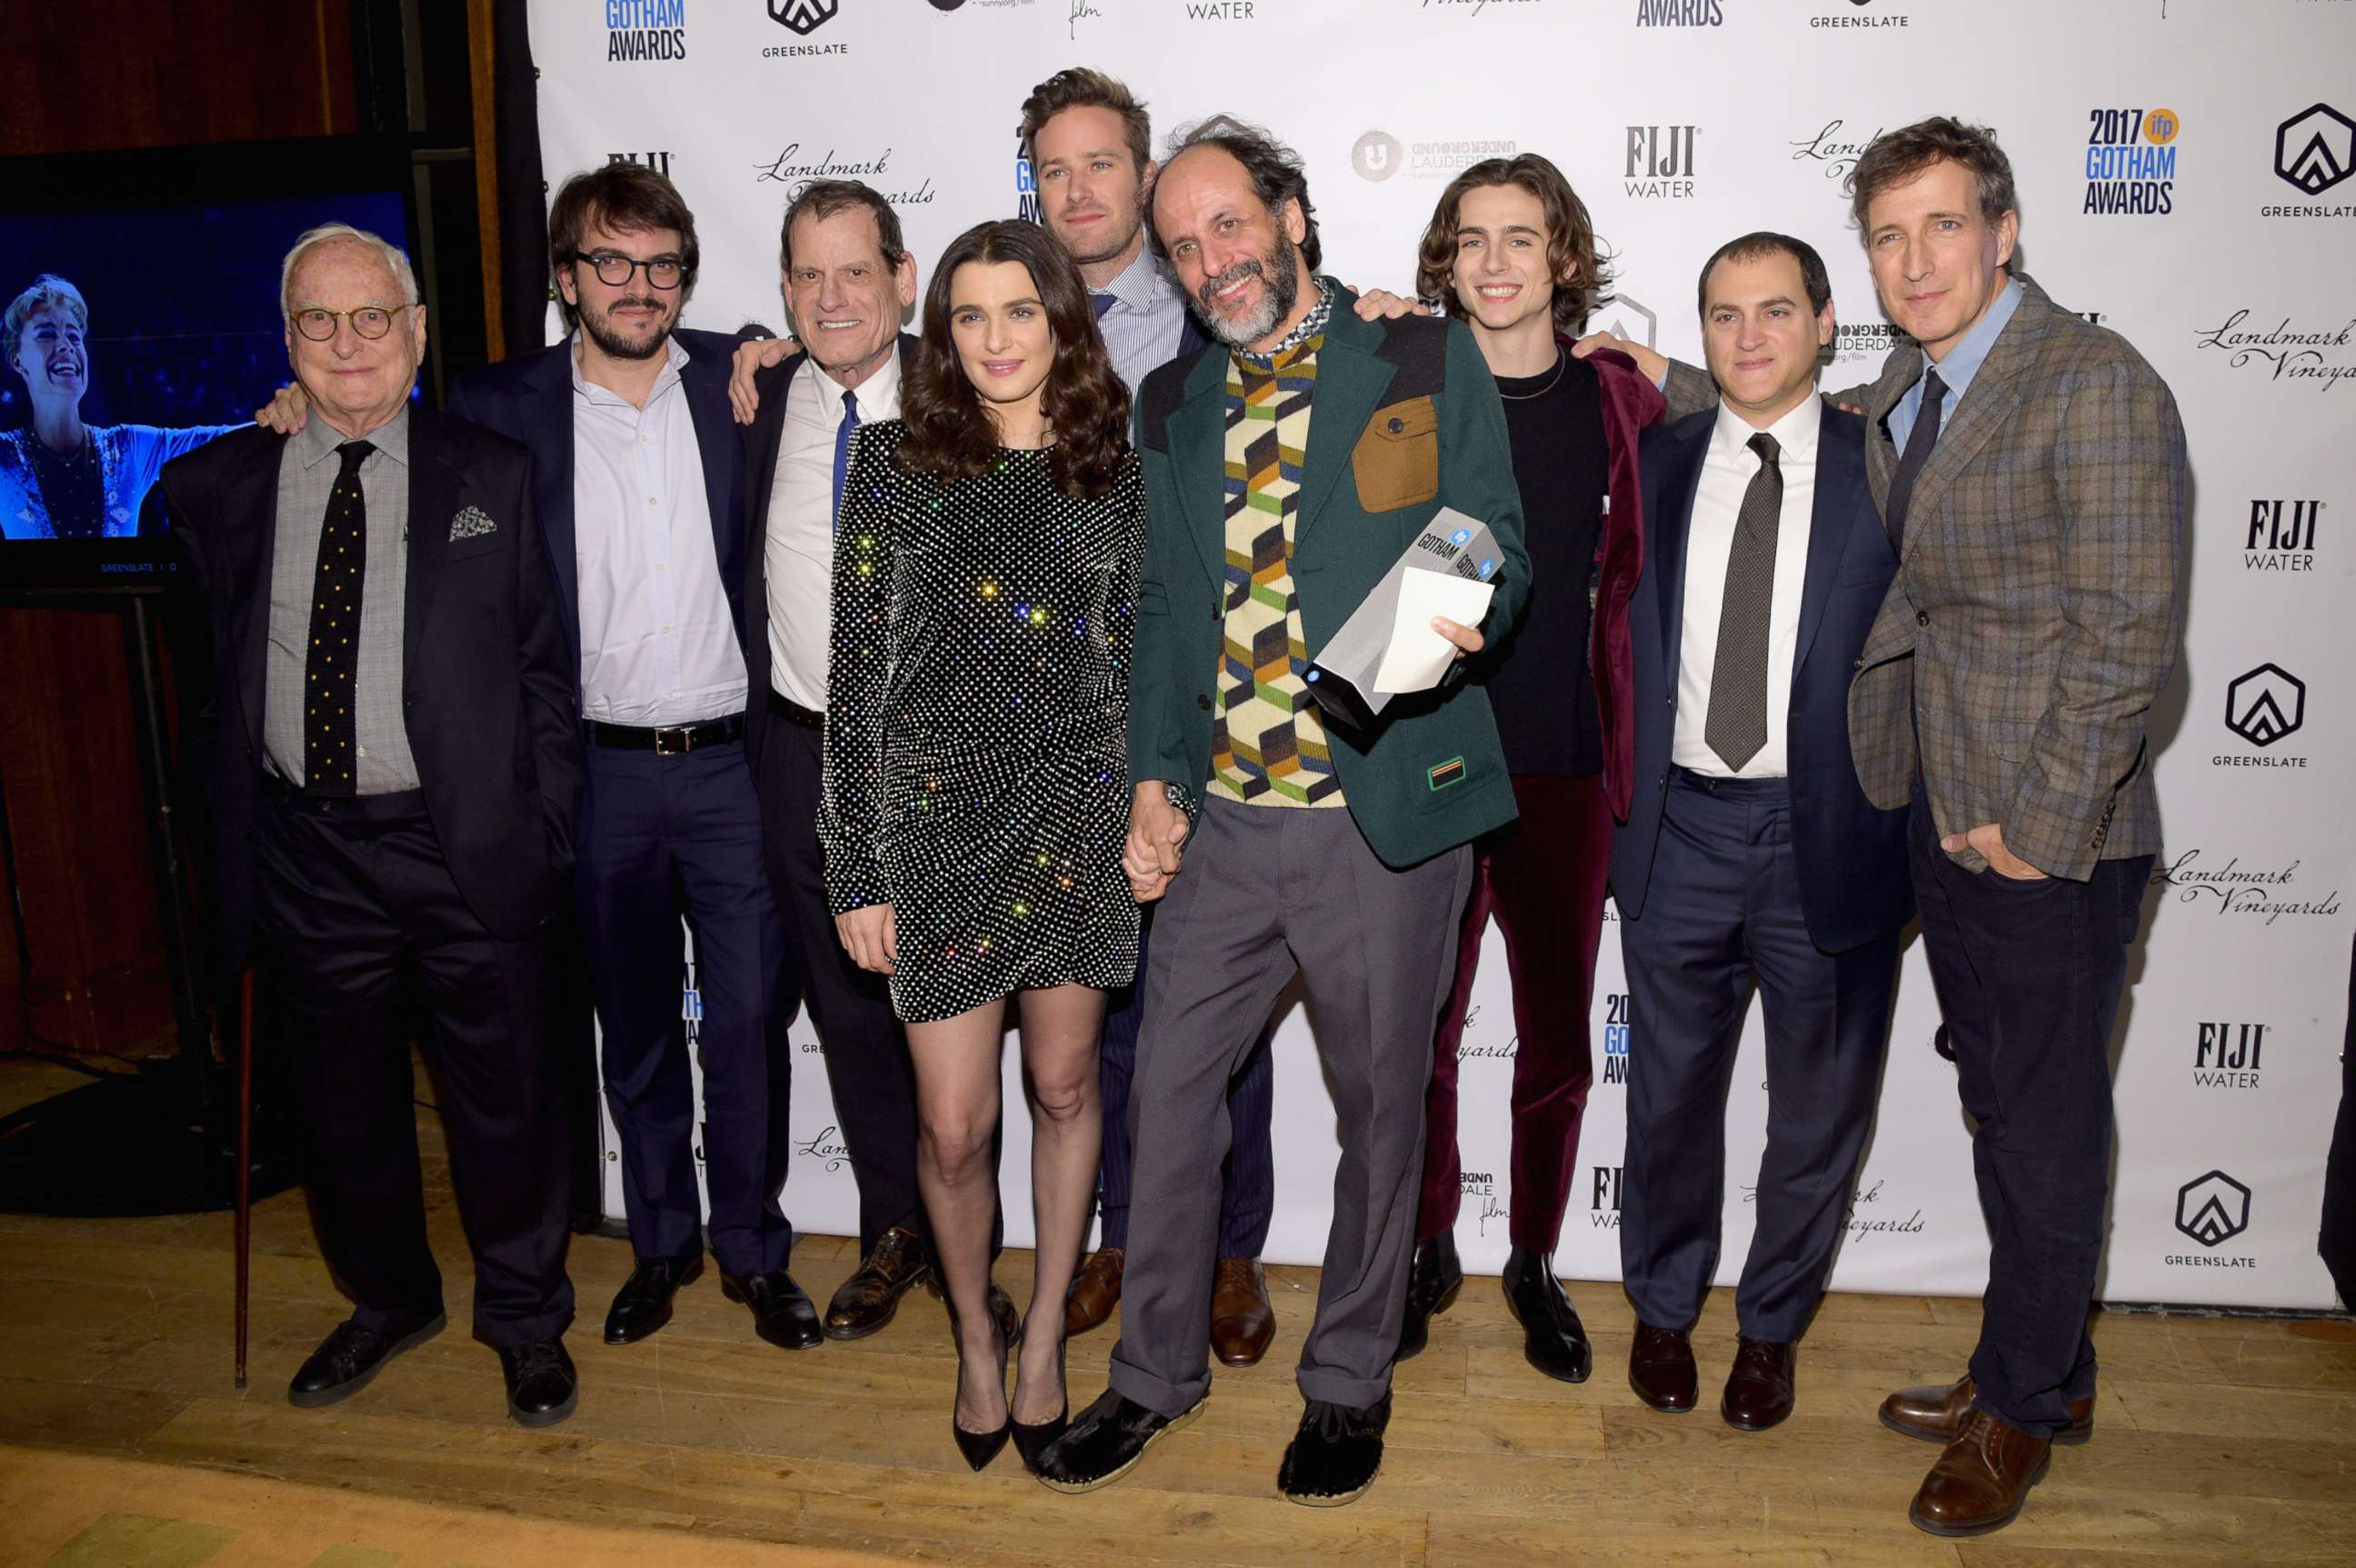 PHOTO: Rachel Weisz, Director, Luca Guadagnino and the cast of Call Me by Your Name pose during The 2017 IFP Gotham Independent Film Awards, Nov. 27, 2017 in New York City. 